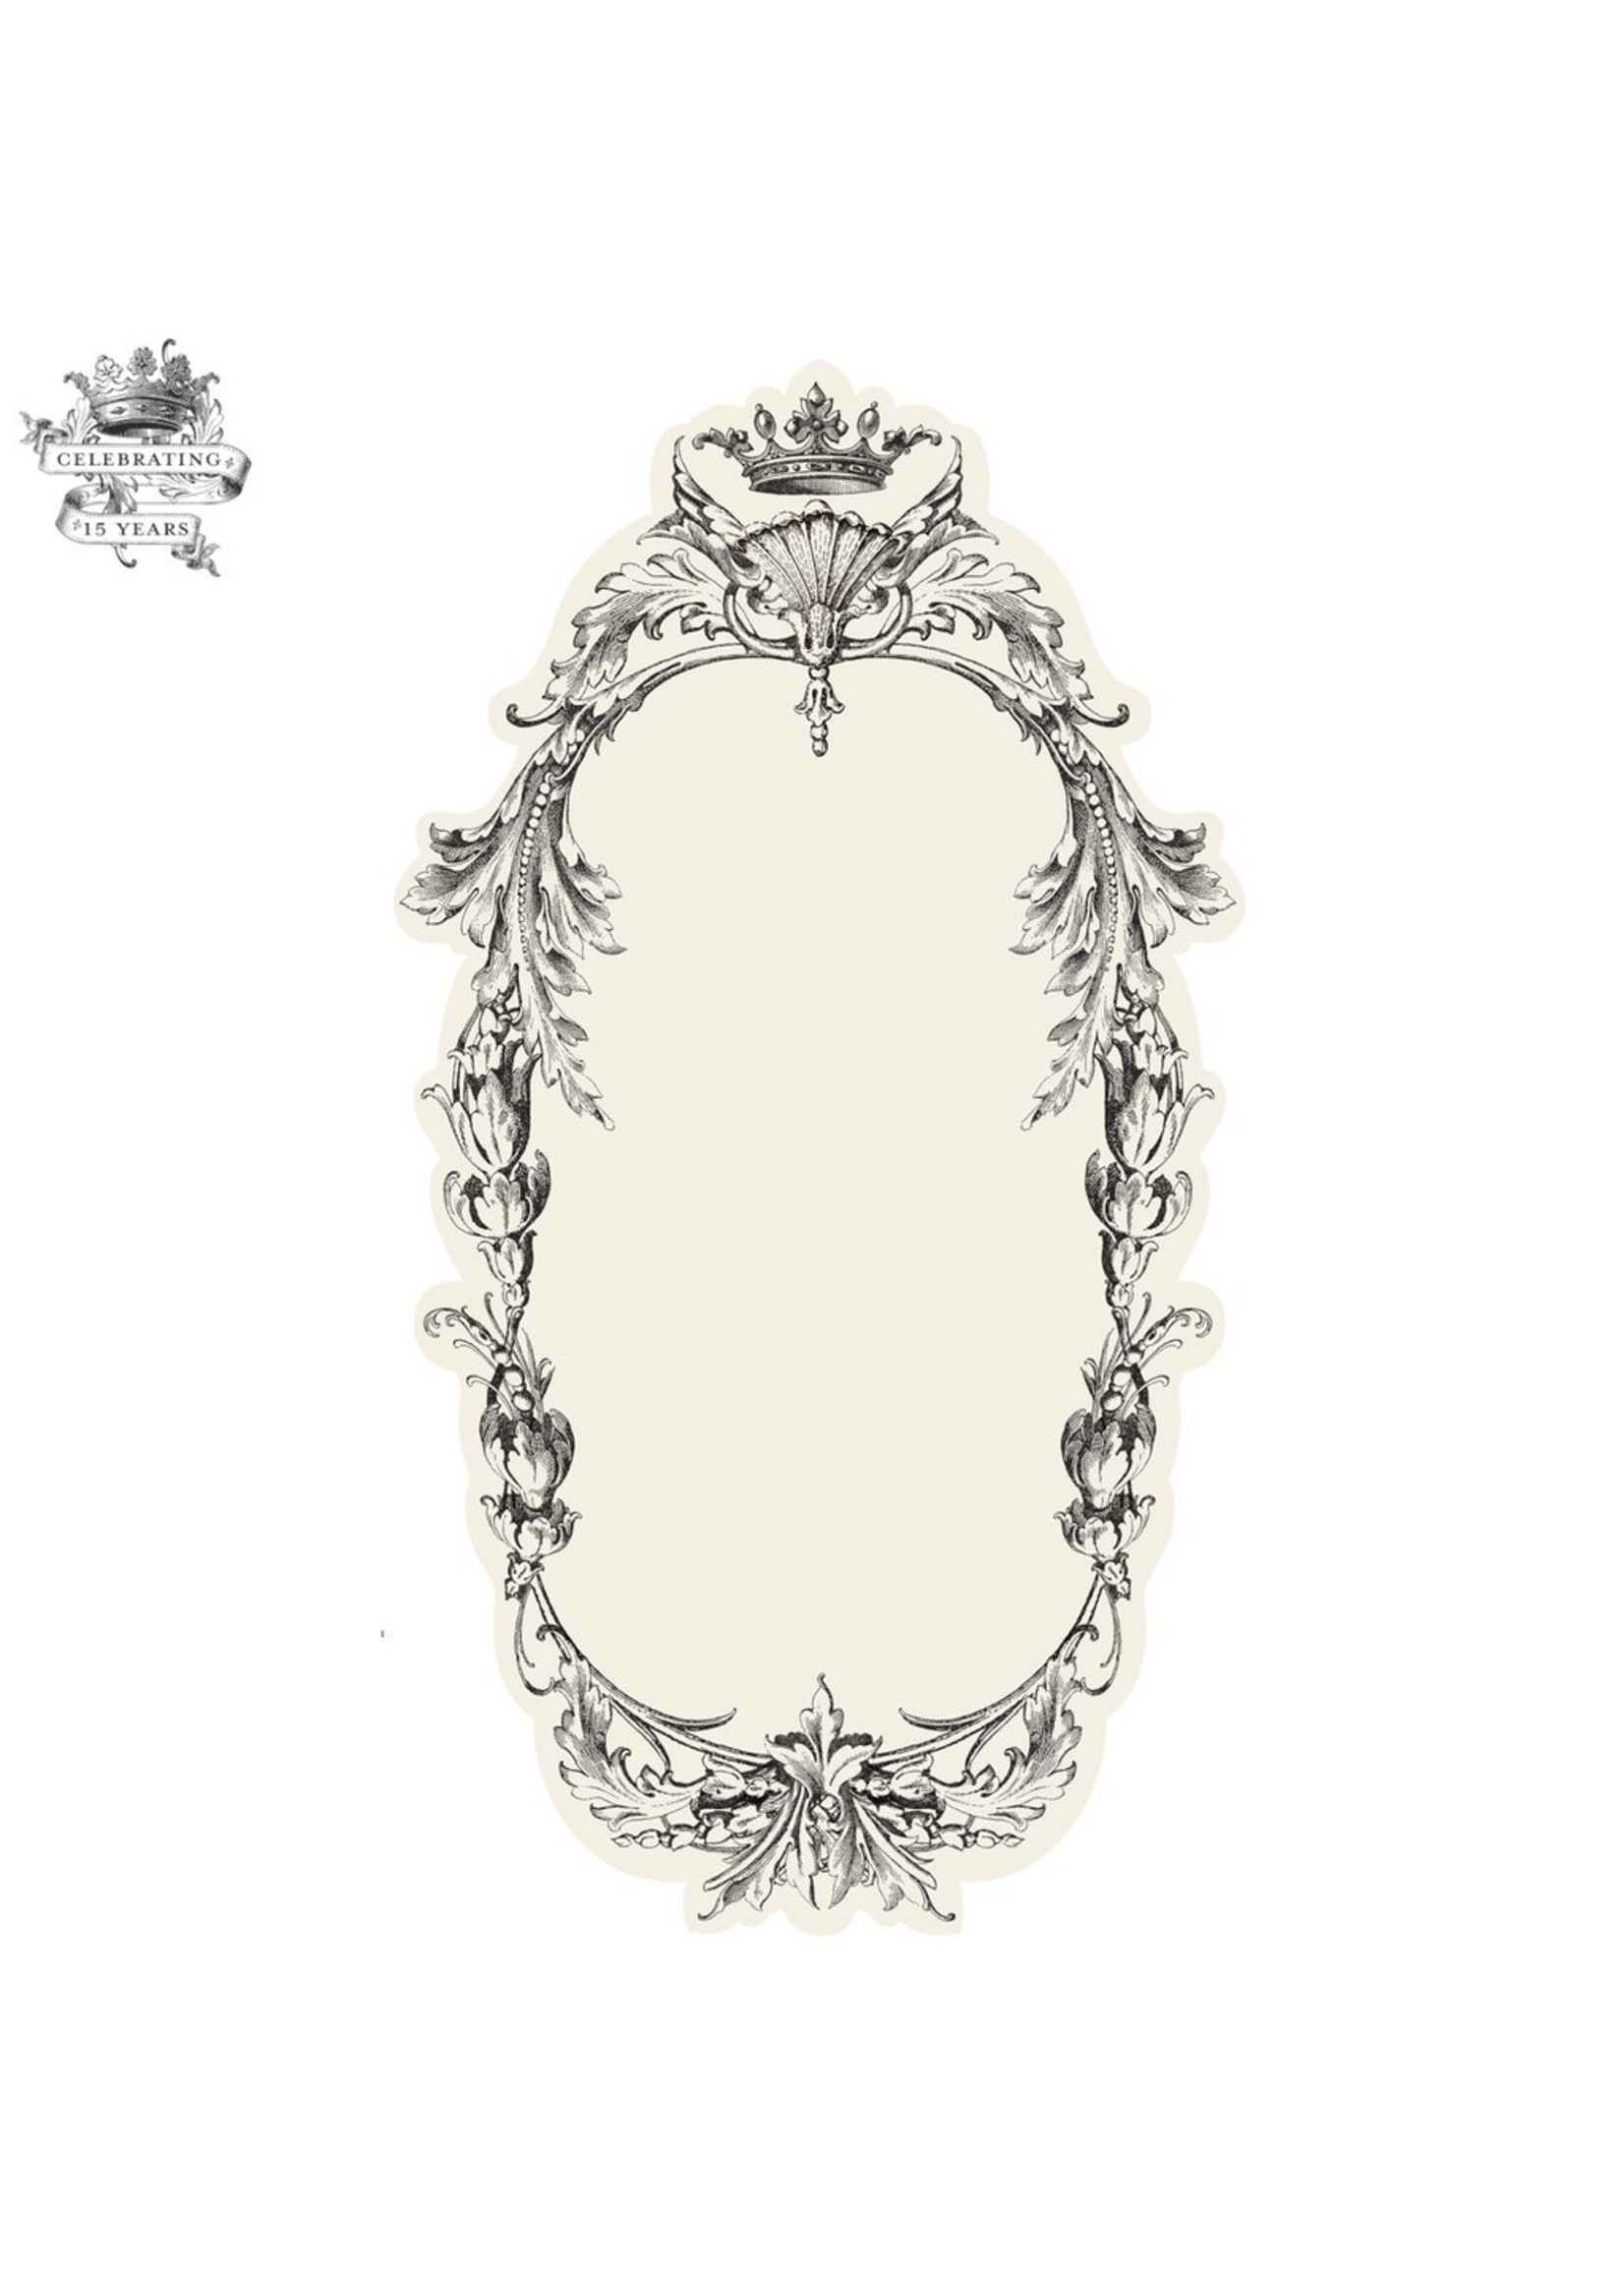 Hester & Cook Flourish Frame Table Accents (set of 12)